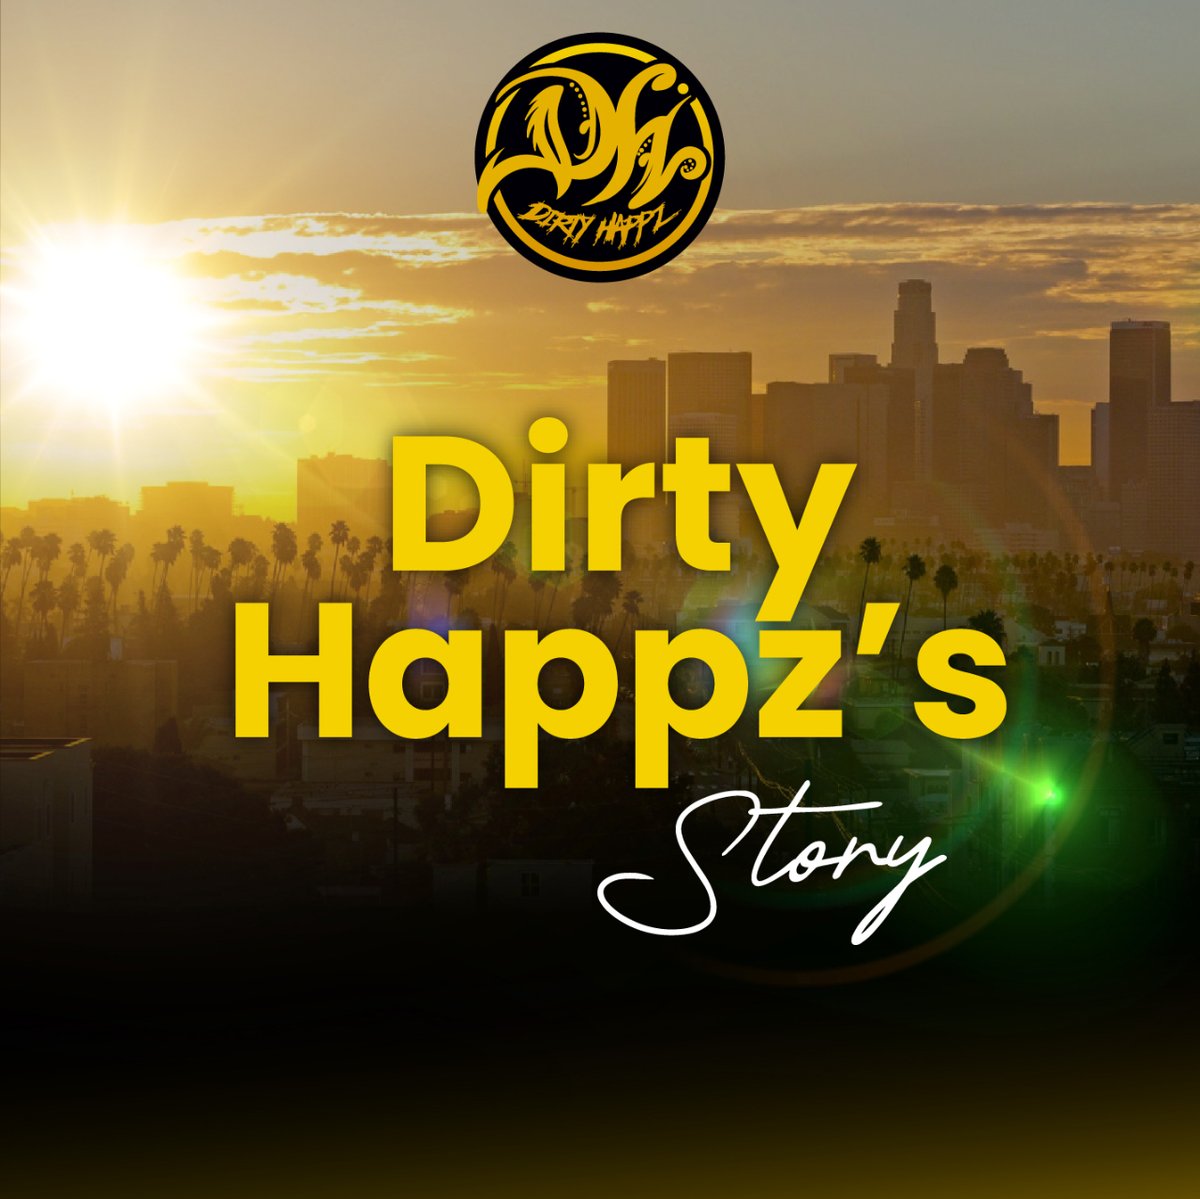 From the streets of LA to the studio, my journey has been all about perseverance. Remember, every struggle is a step forward. Stay true, stay you. #DirtyHappzStory #LAHipHop 🎶🛣️